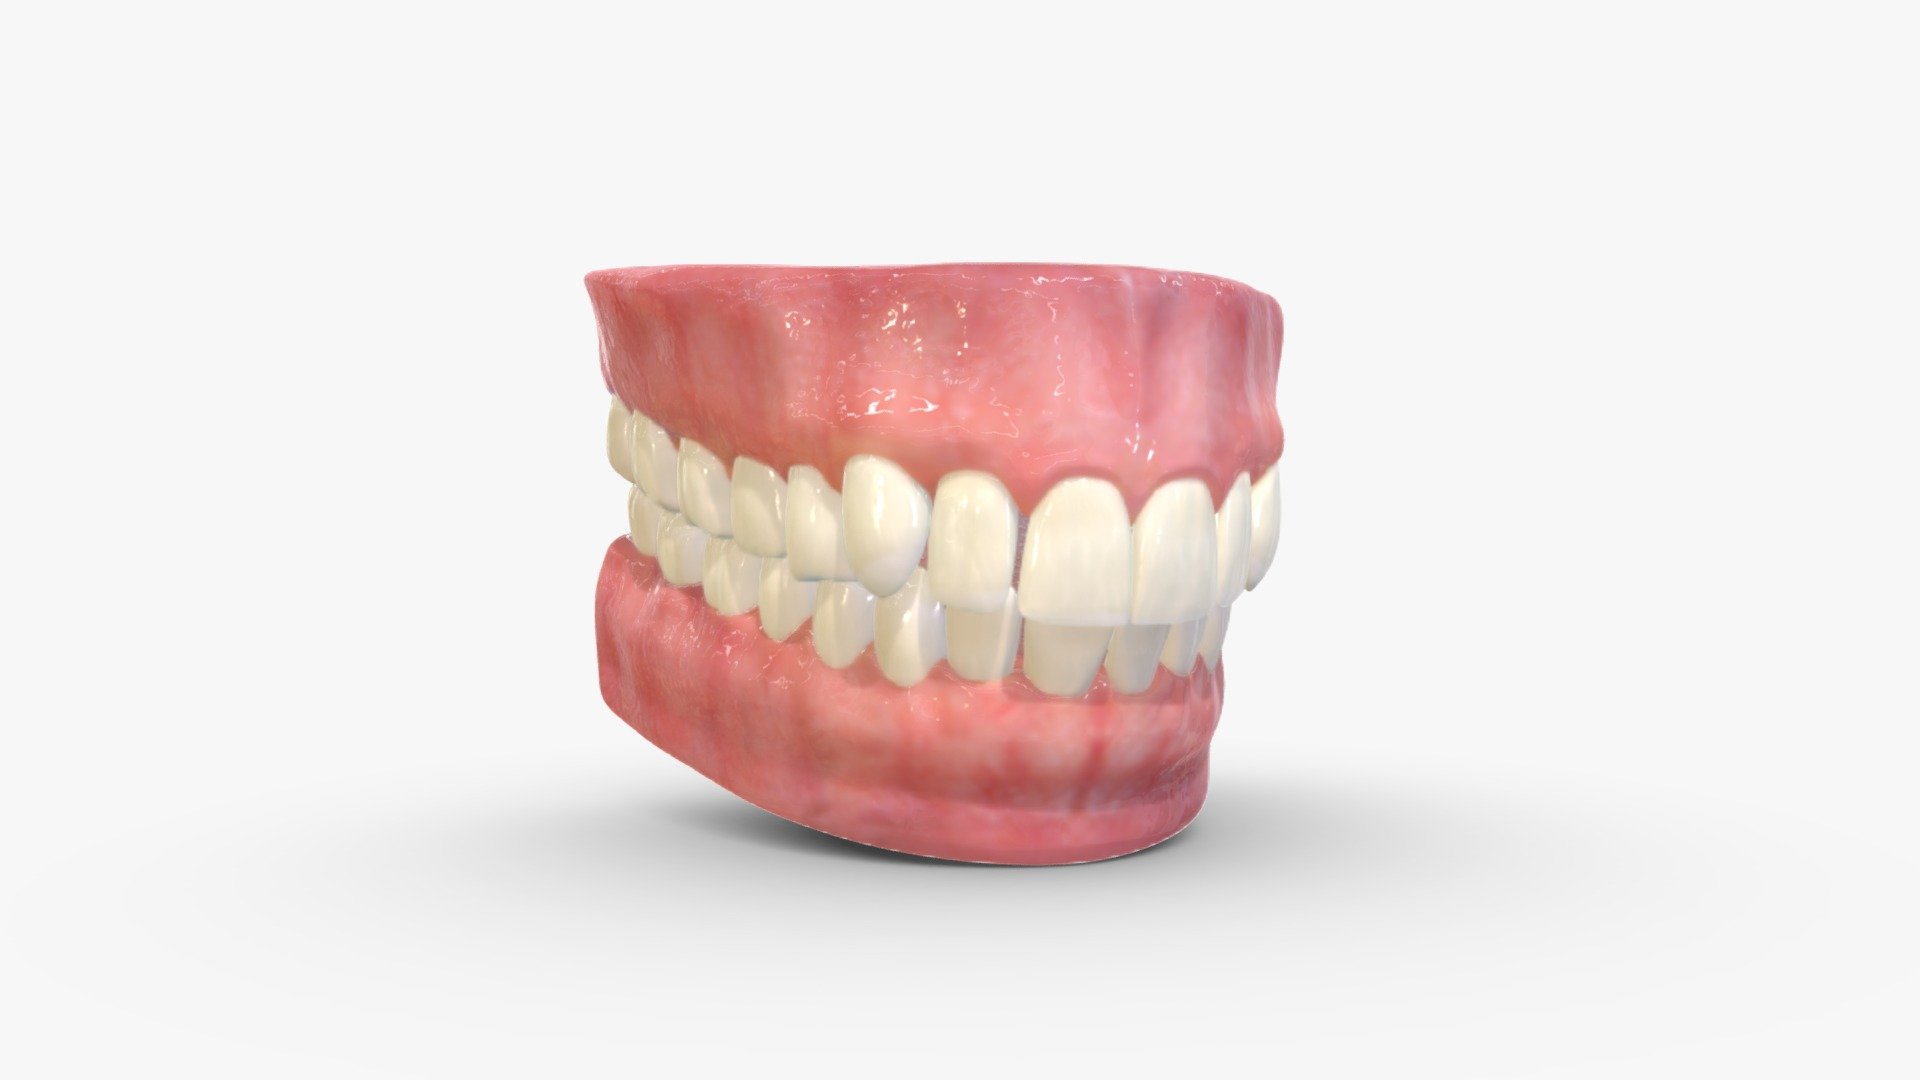 🙏 If you use these model for visual reference consider buying me a ☕ It would really help me out! *** https://ko-fi.com/heledahn***


This is a digital 3d model of a realistic mouth, with proportionate teeth, gums and a tongue. 






👉 I have other types of teeth avaliable at my shop with different proportions/configurations.

This model can be used either as a background prop, or as a closeup prop due to its high detail and visual quality.

This product will achieve realistic results in your rendering projects and animations, being greatly suited for close-ups due to their high quality topology and PBR shading 3d model